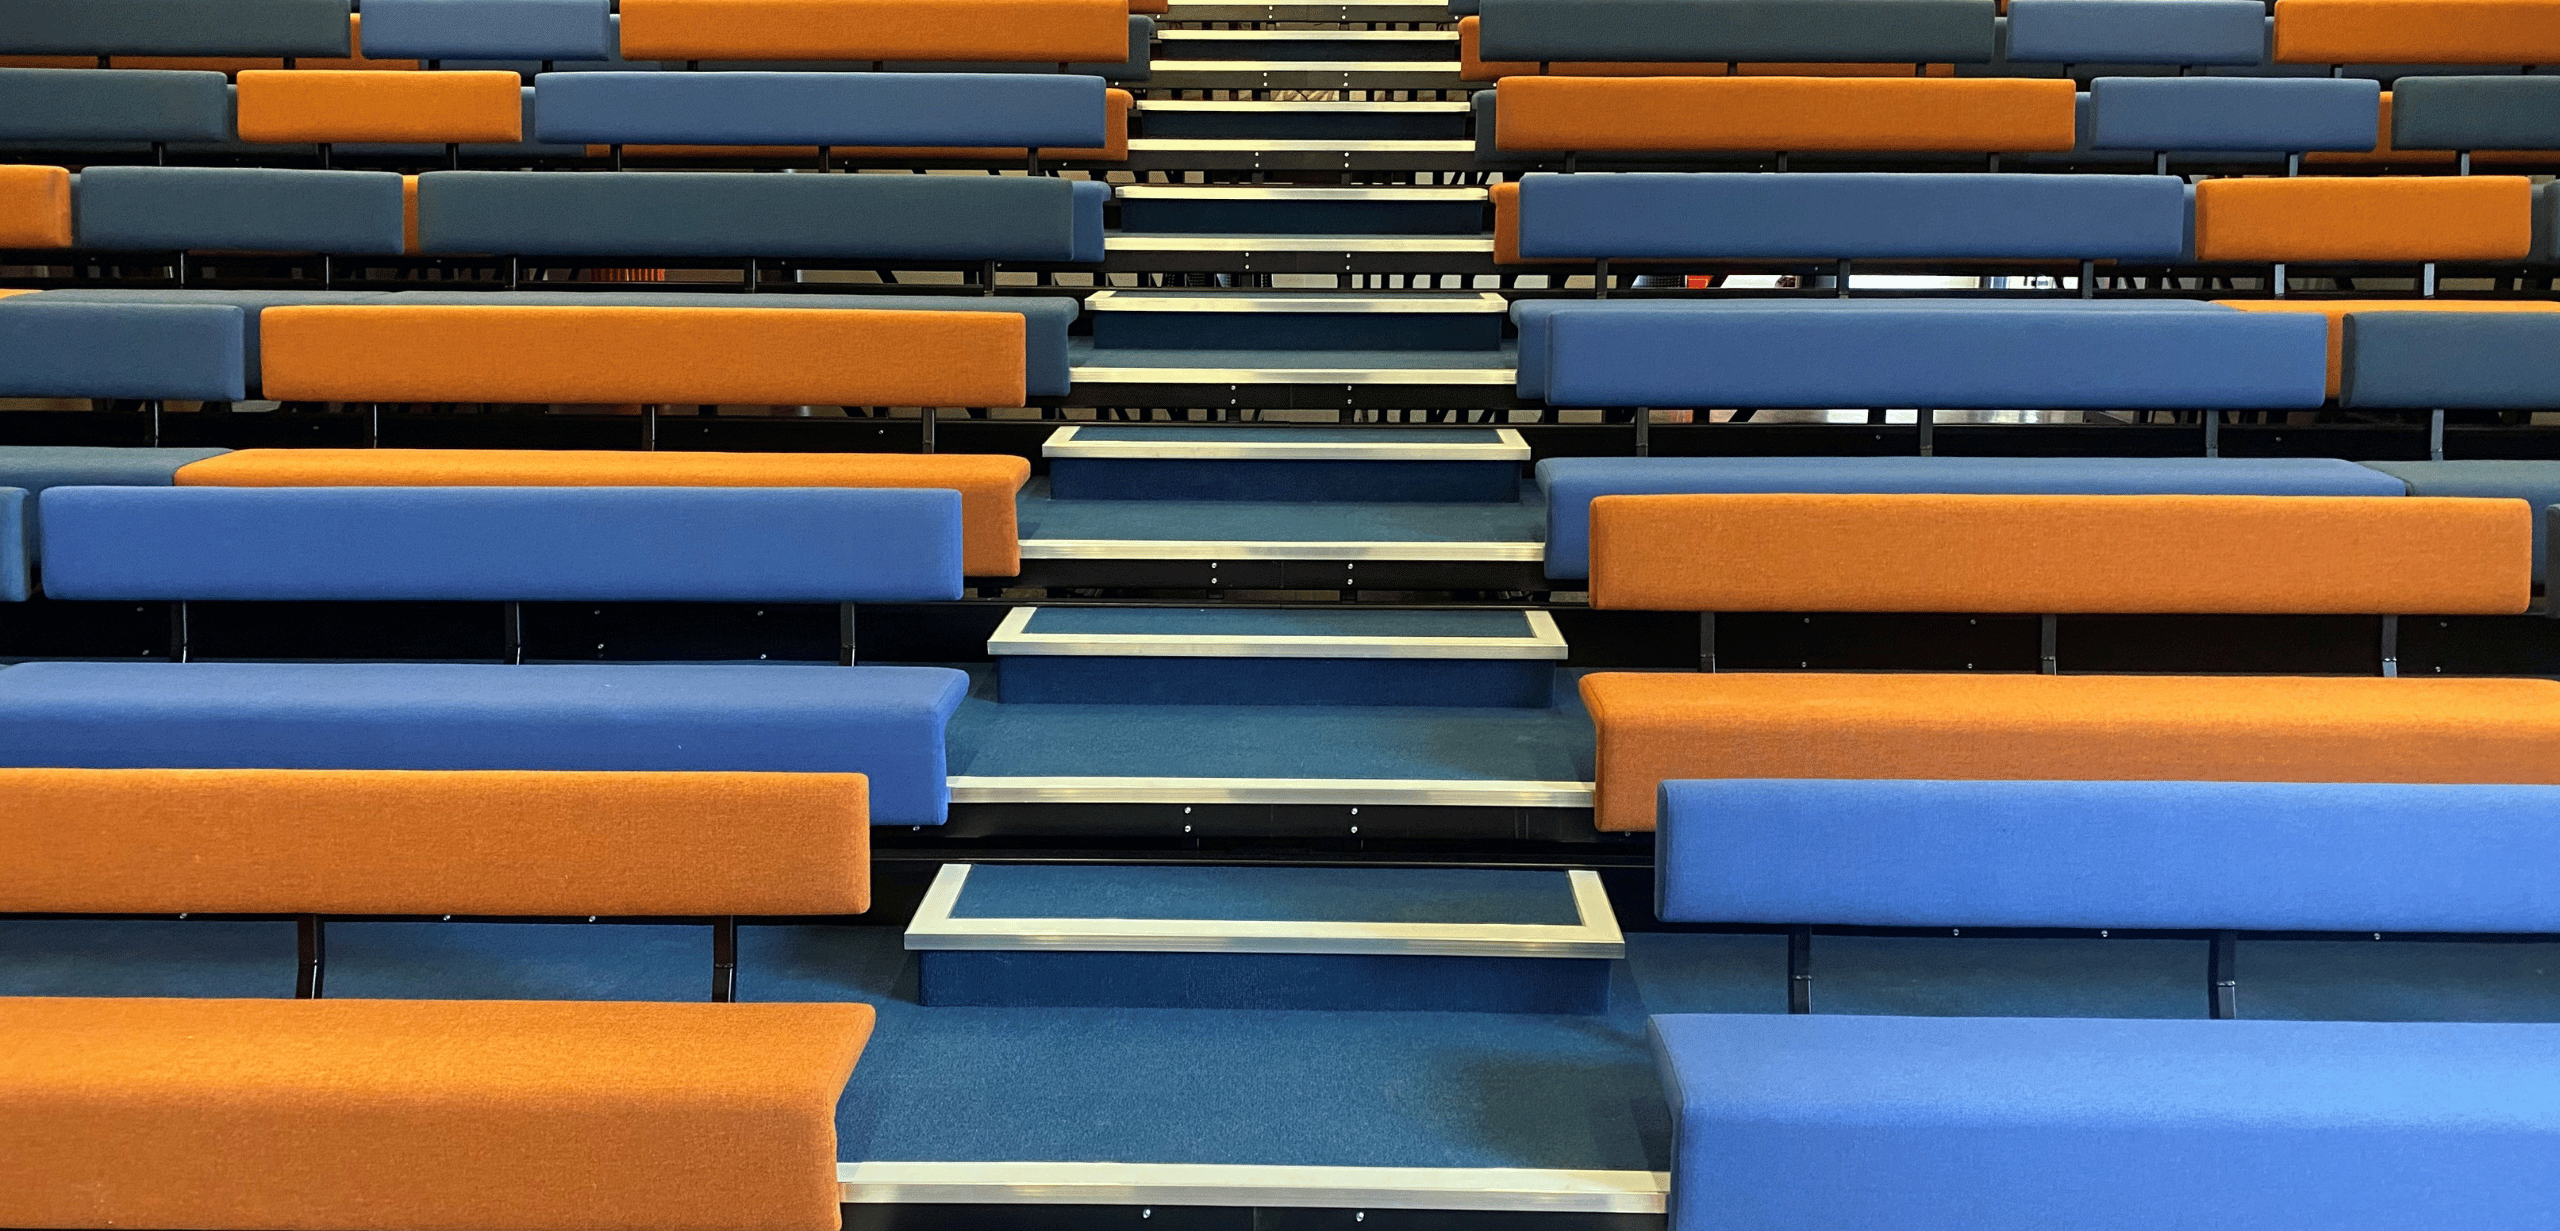 A row of blue and orange auditorium seating in an auditorium.